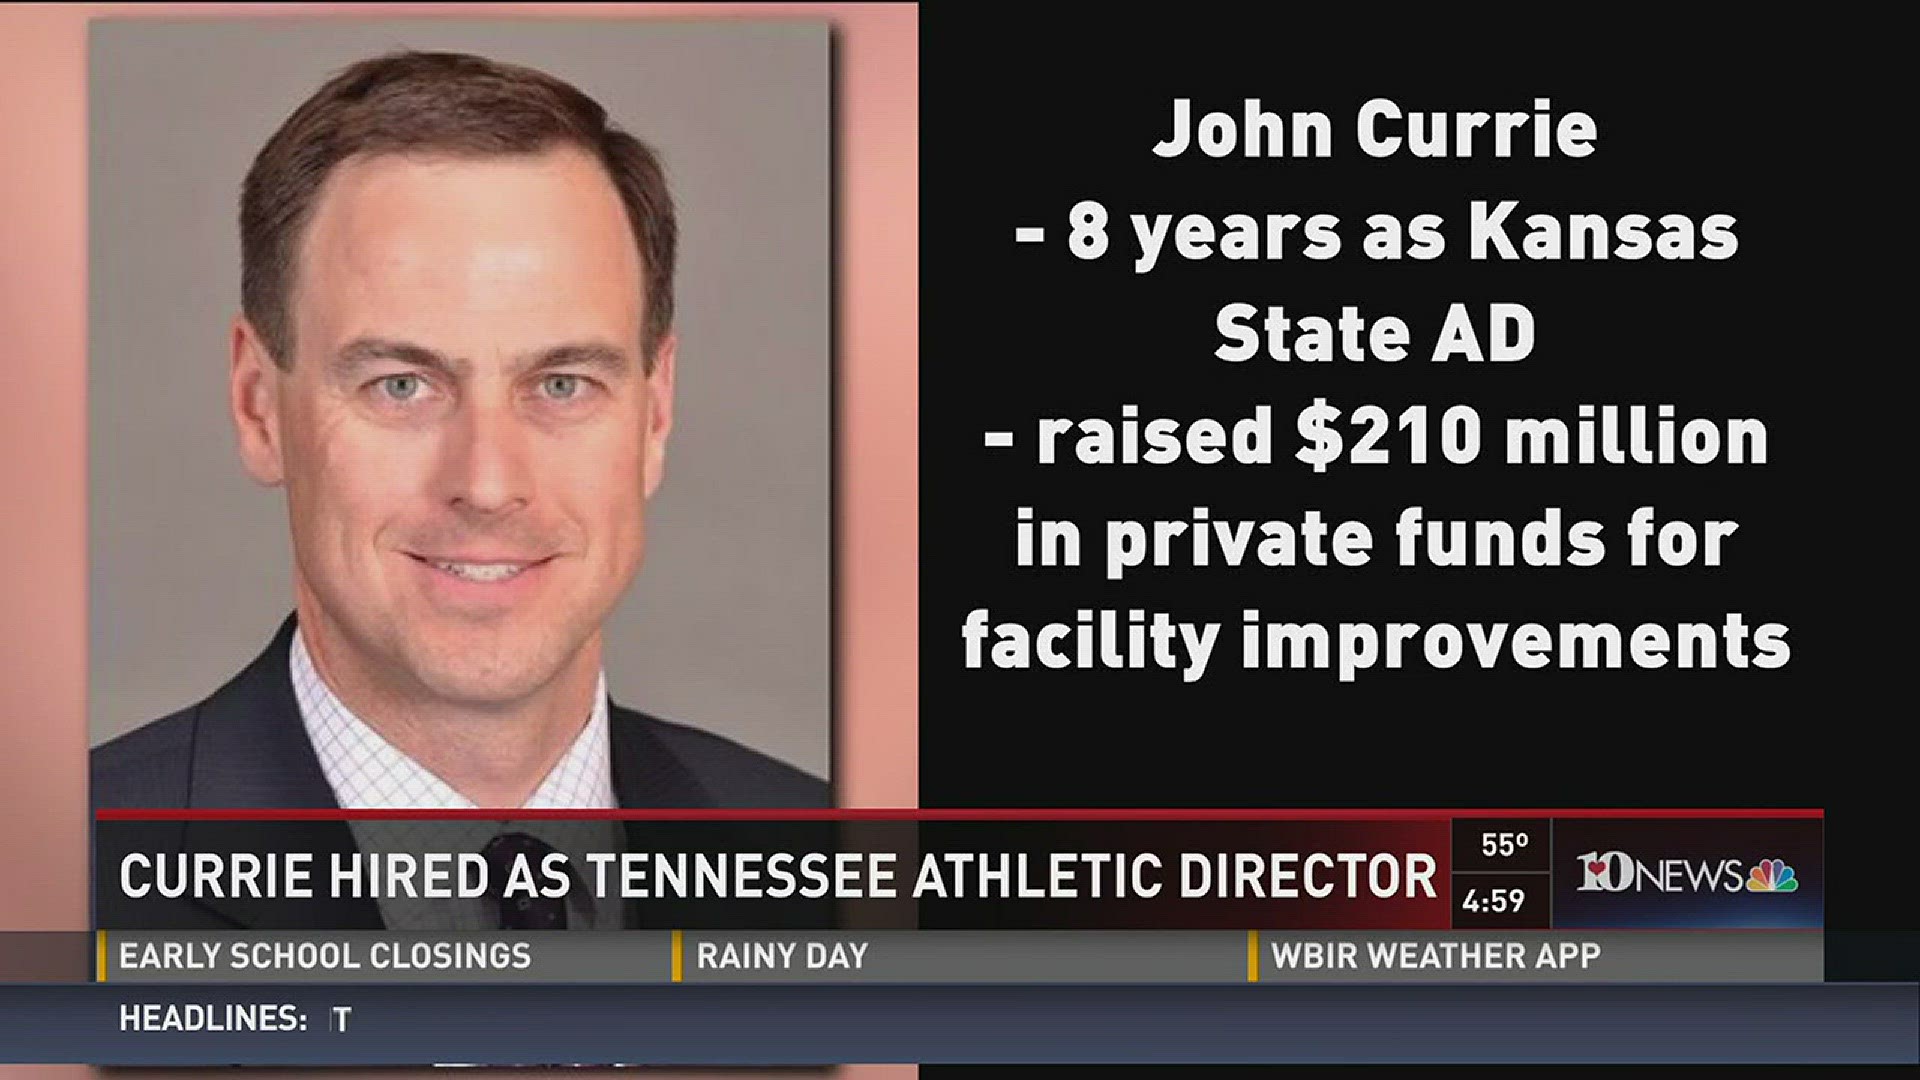 Currie served in UT's athletic department from 1997-2009 before leaving to head up the department at Kansas State.